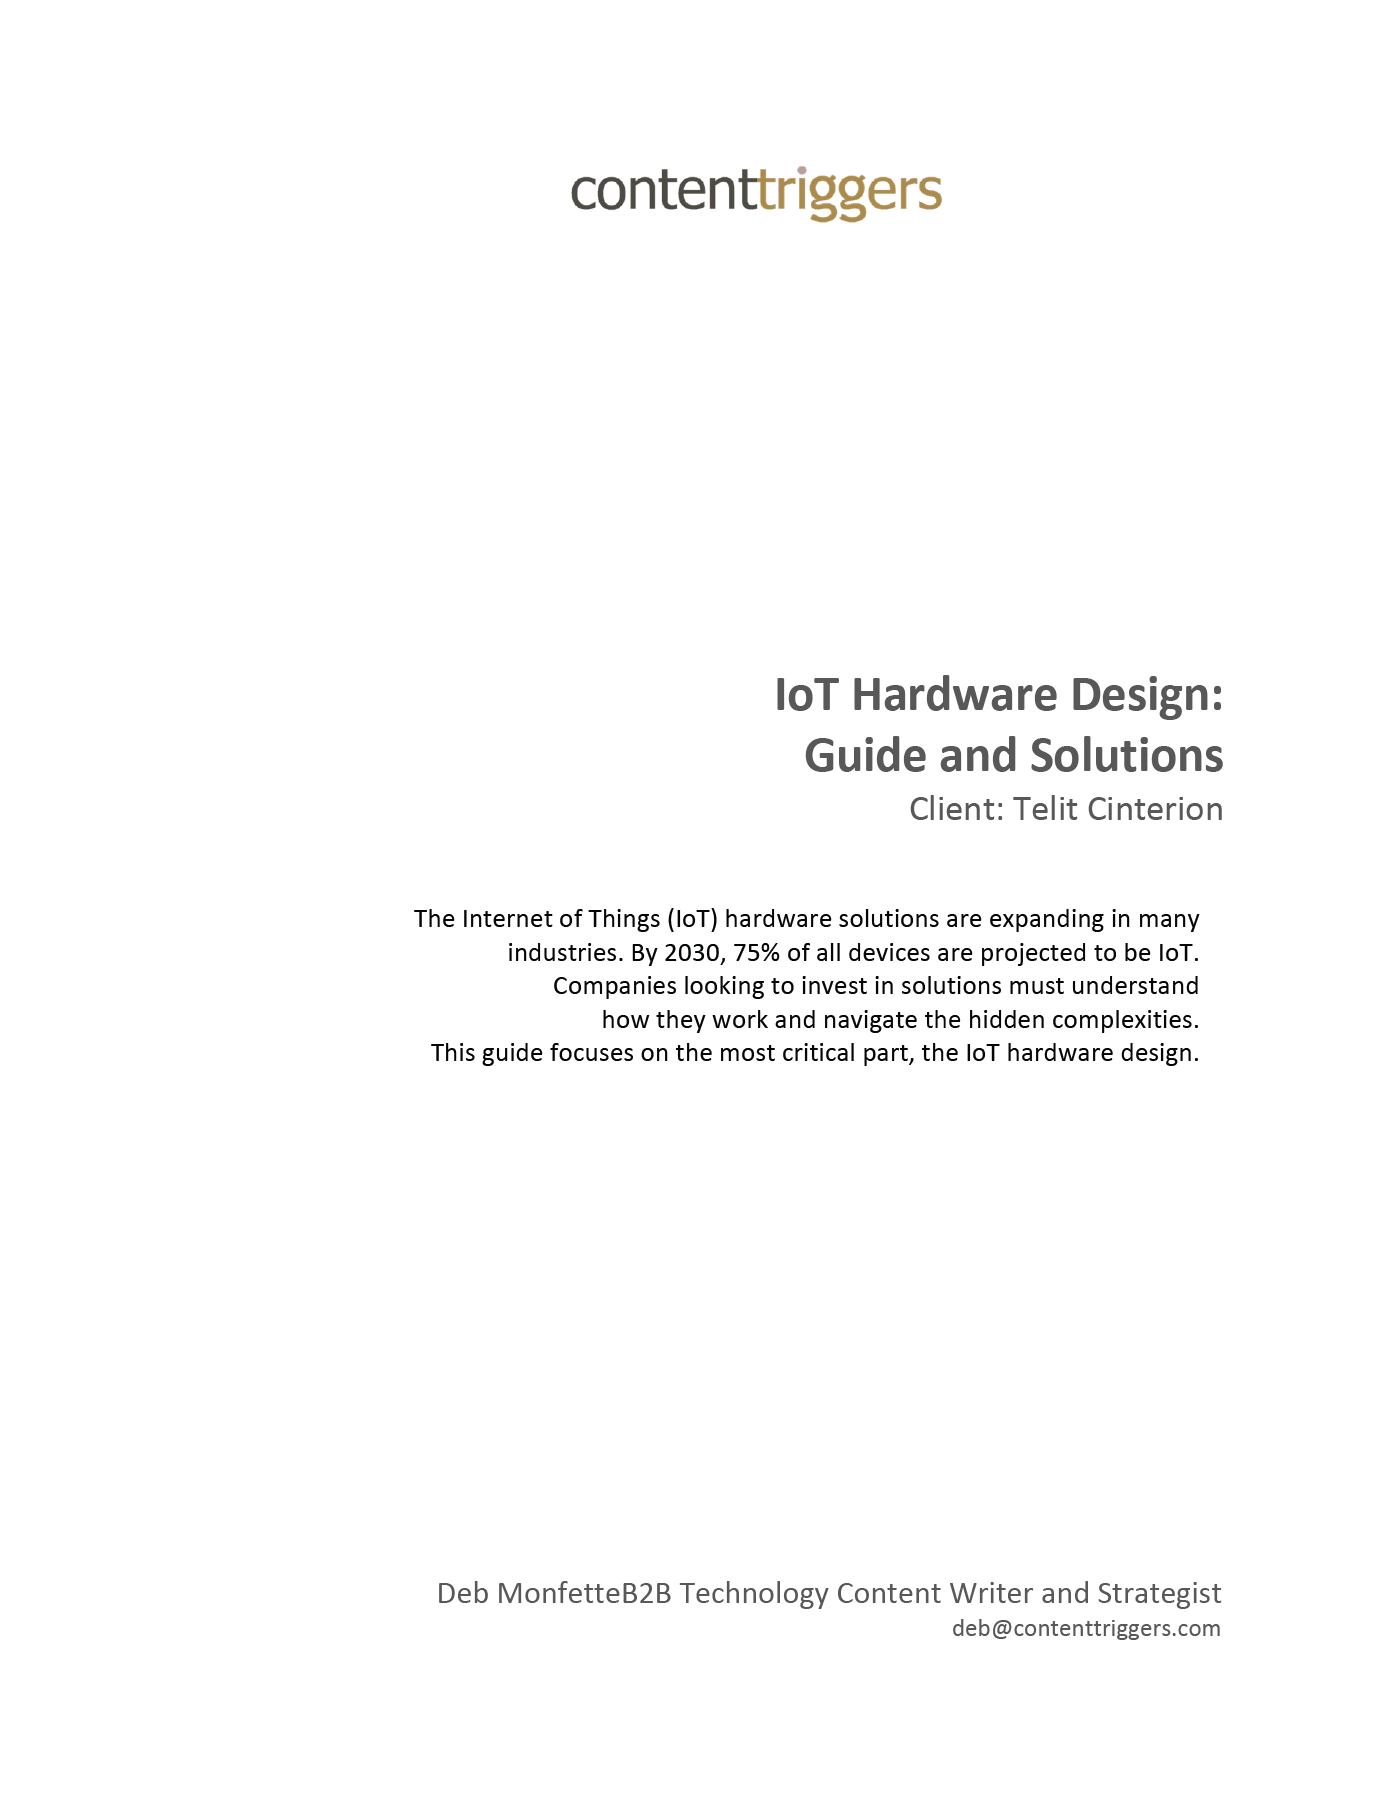 IoT Hardware Guide png